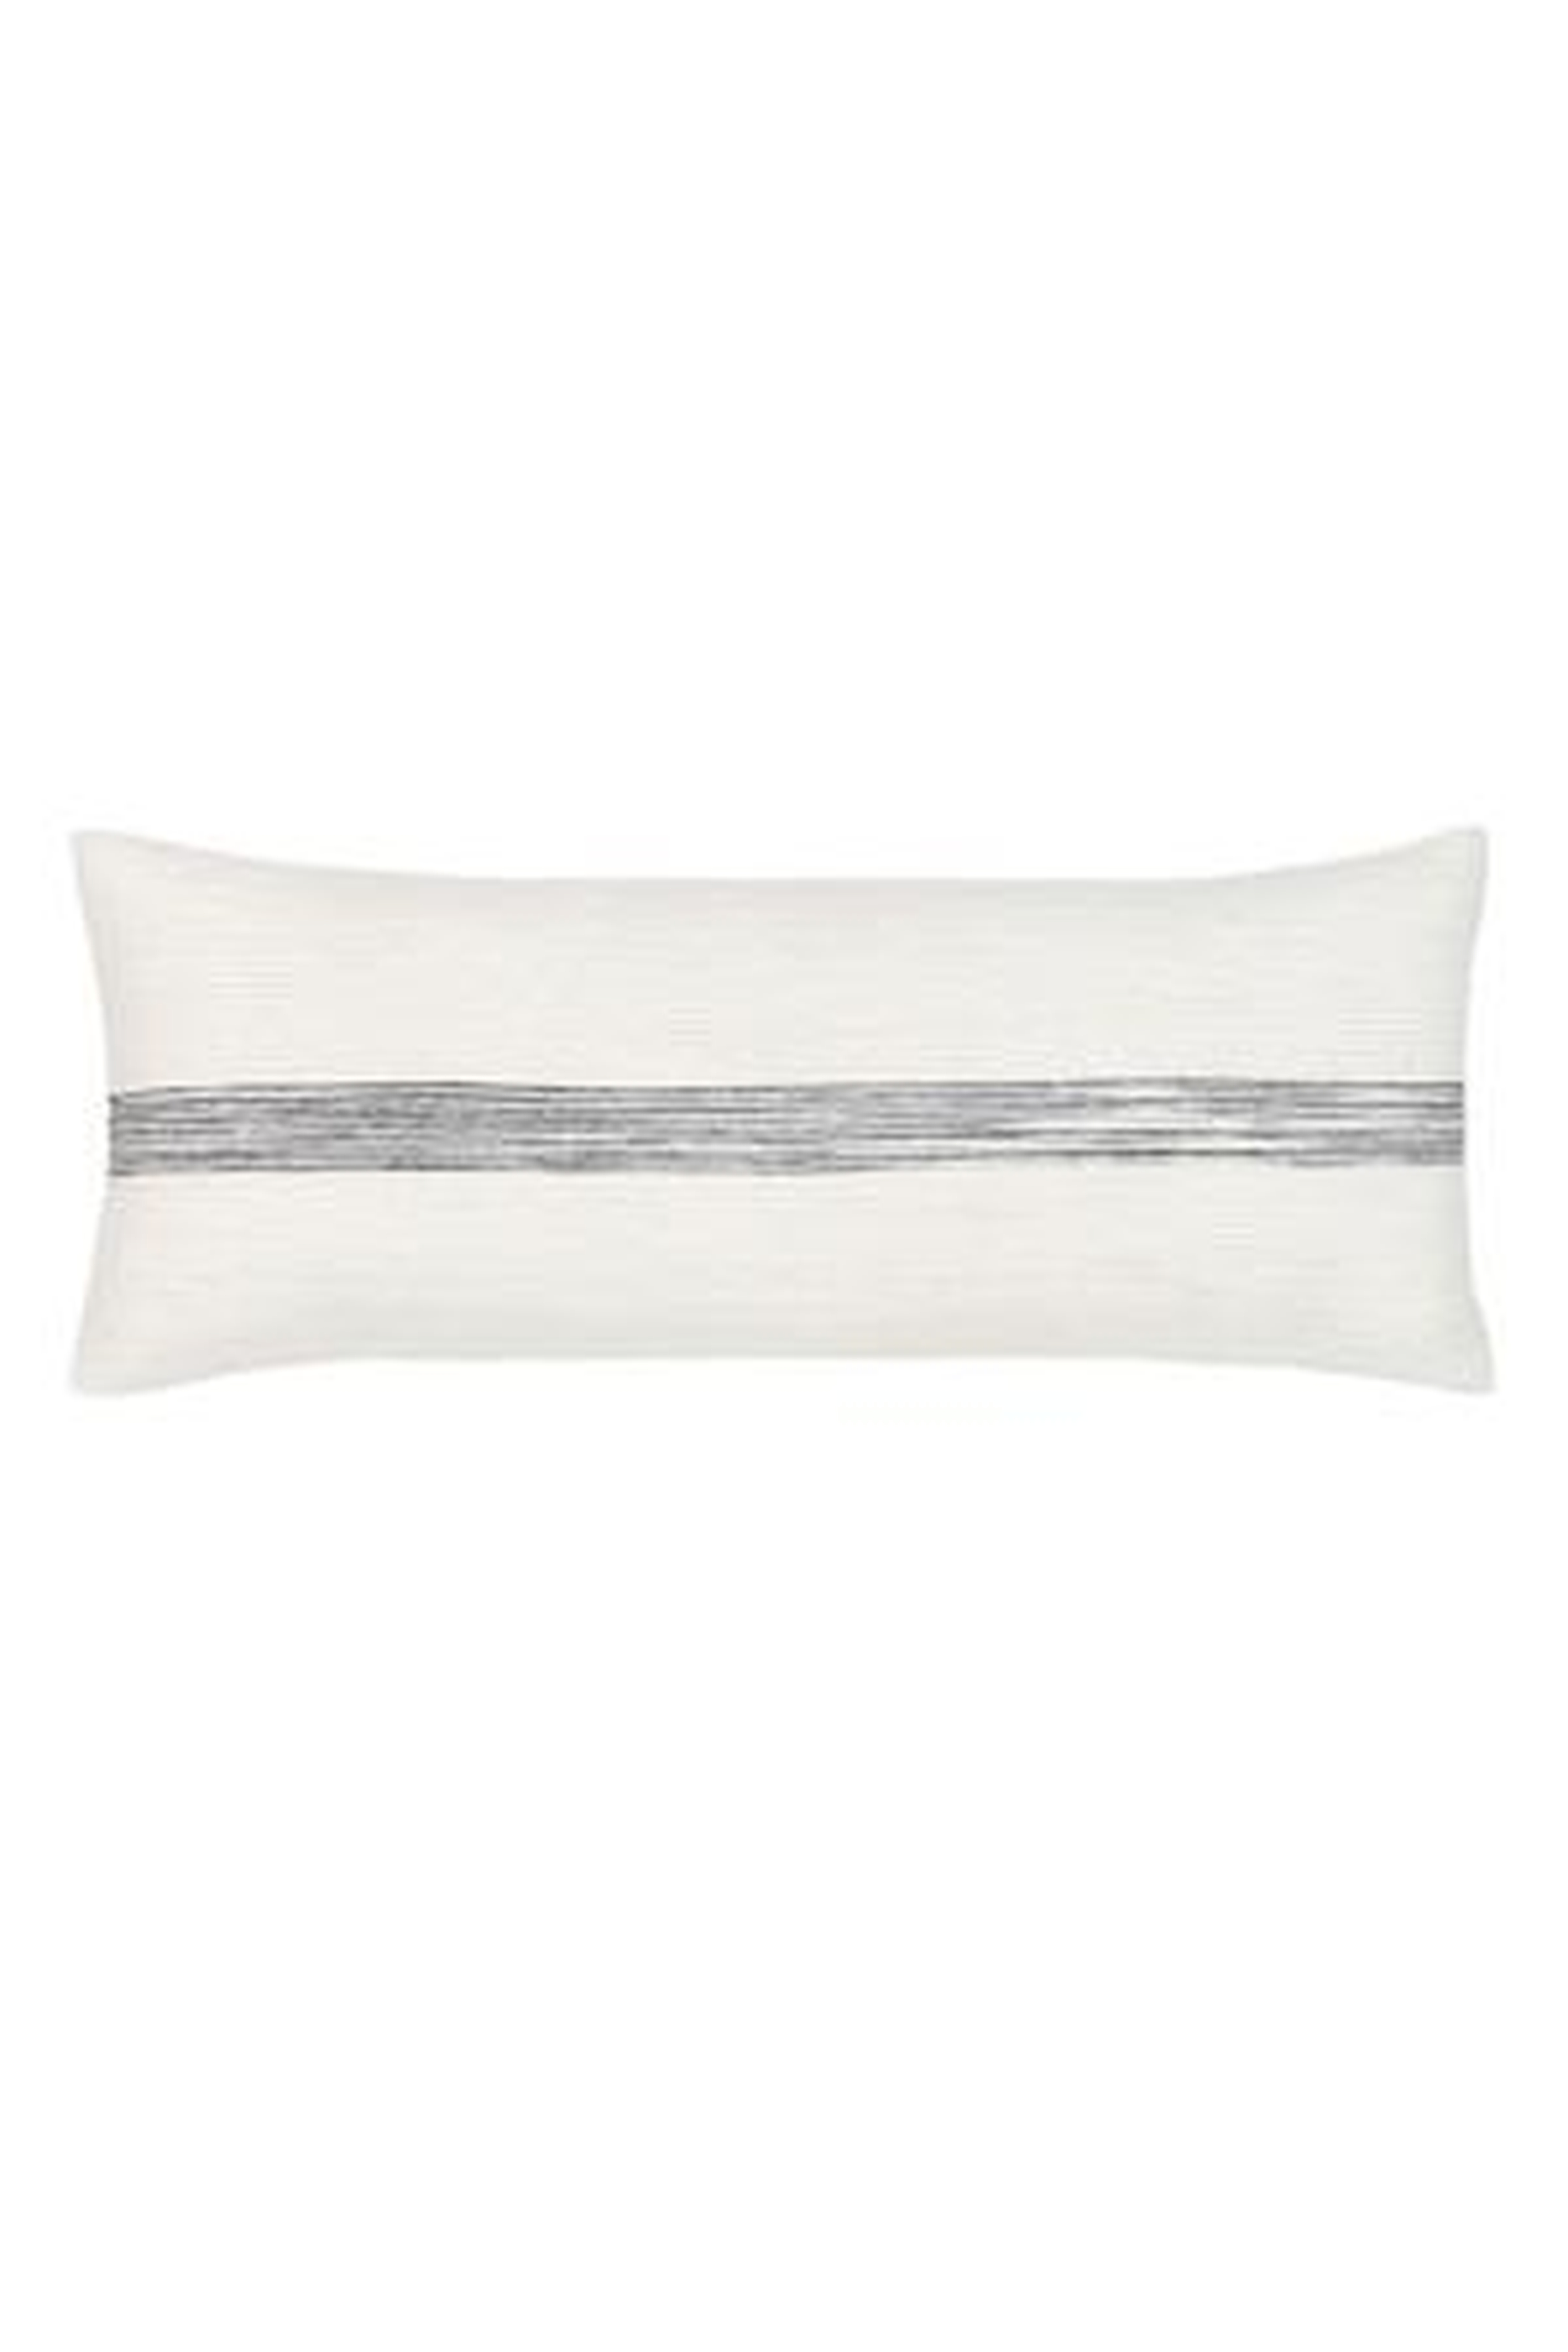 Burton Ivory  and Black Lumbar Pillow Cover Only - Cove Goods